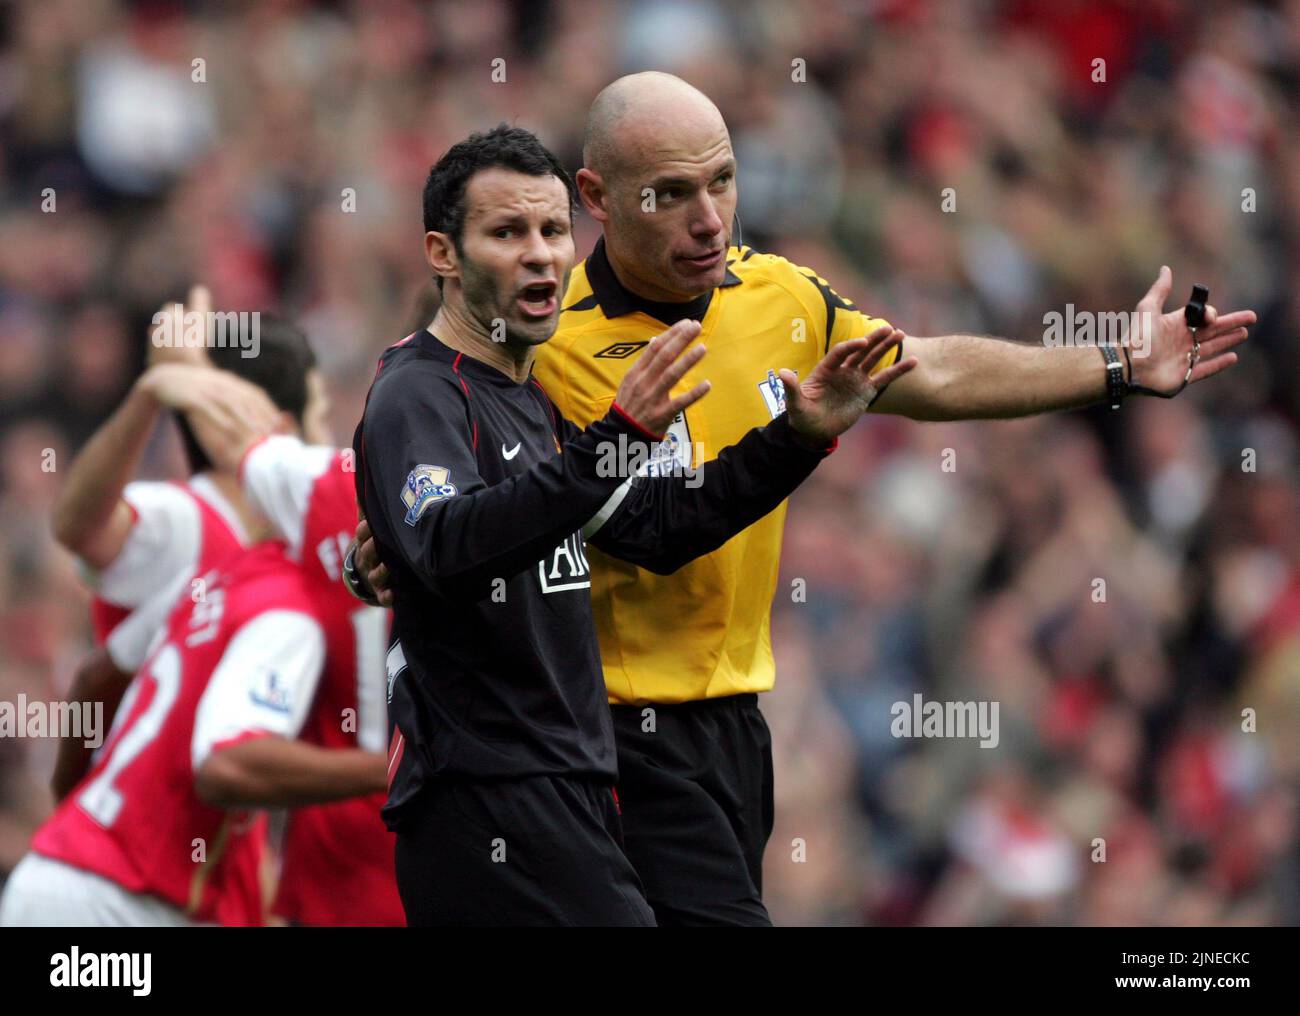 Arsenal v Man U  Howard Webb leads away Ryan Giggs after protests against equalizer     picture by Pixel8000 Ltd Stock Photo